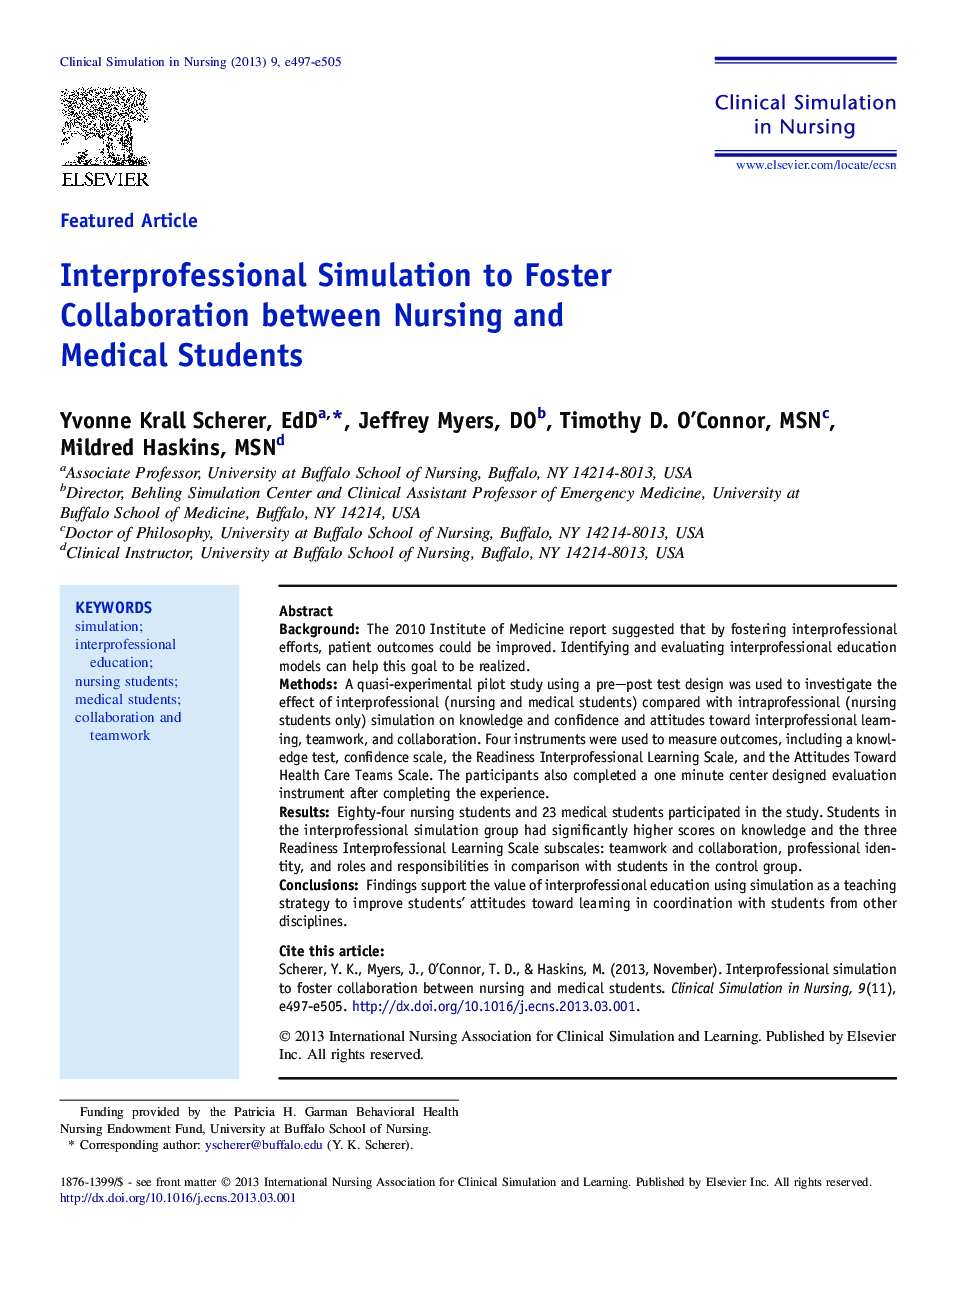 Interprofessional Simulation to Foster Collaboration between Nursing and Medical Students 